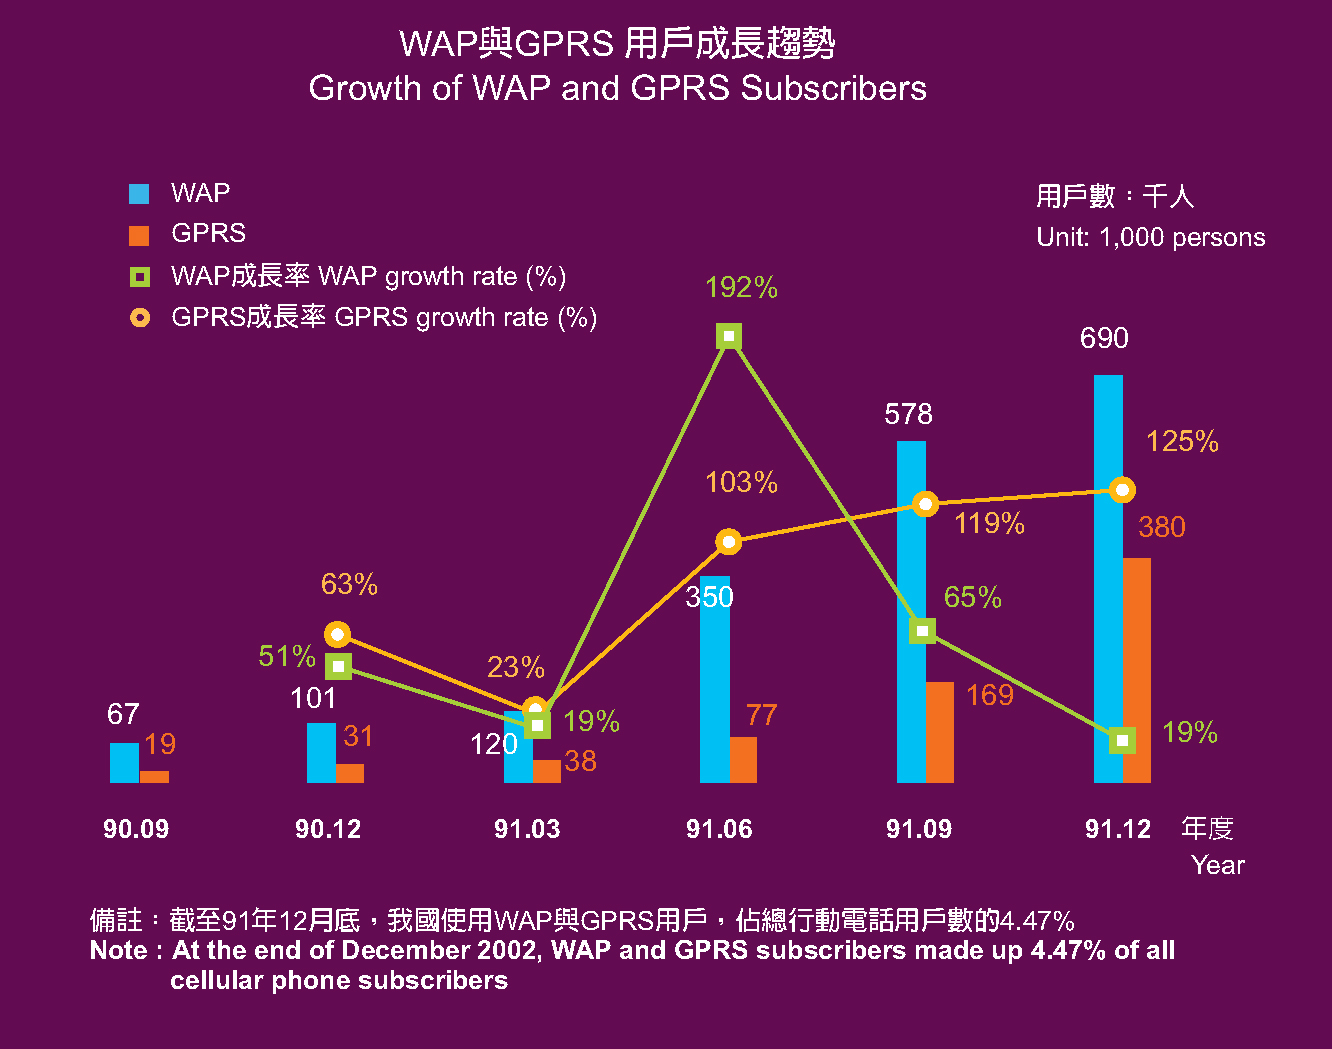 Growth of WAP and GPRS Subscribers